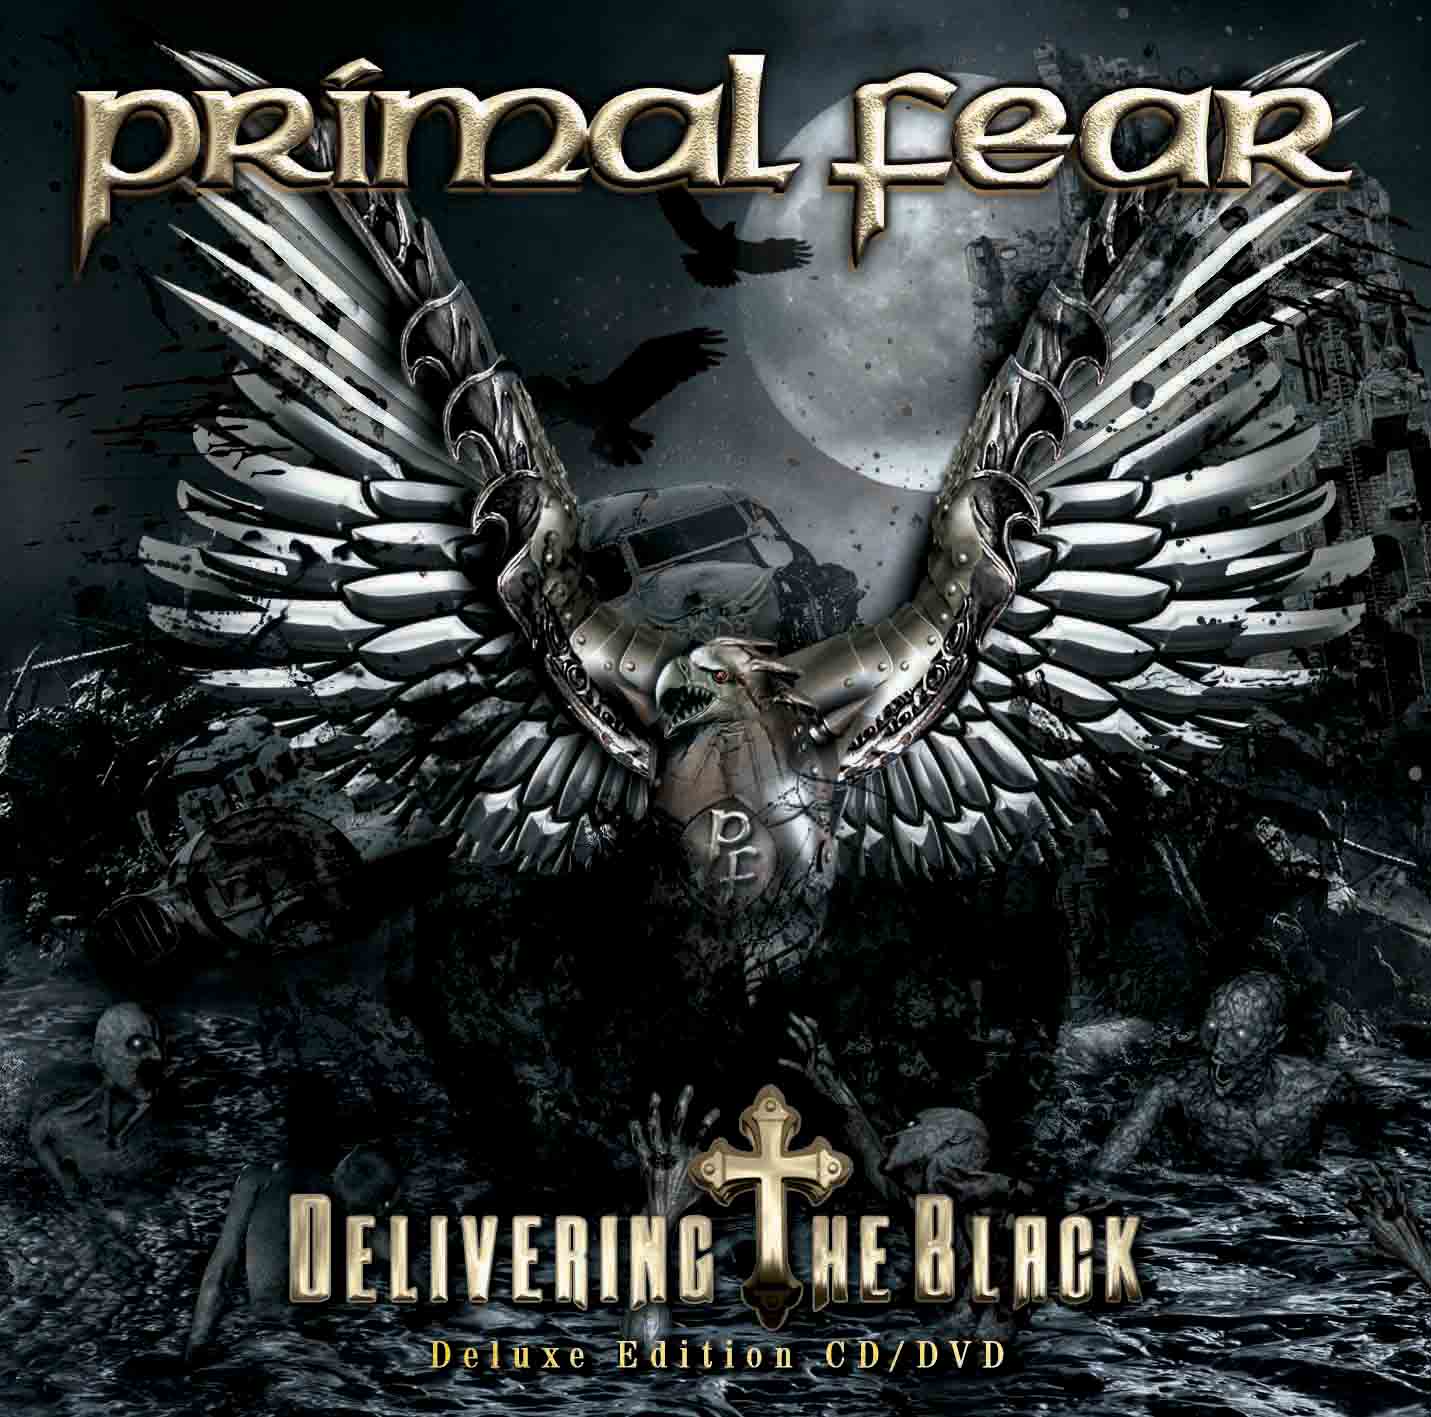 PRIMAL FEAR - Delivering the Black (Deluxe Edition)